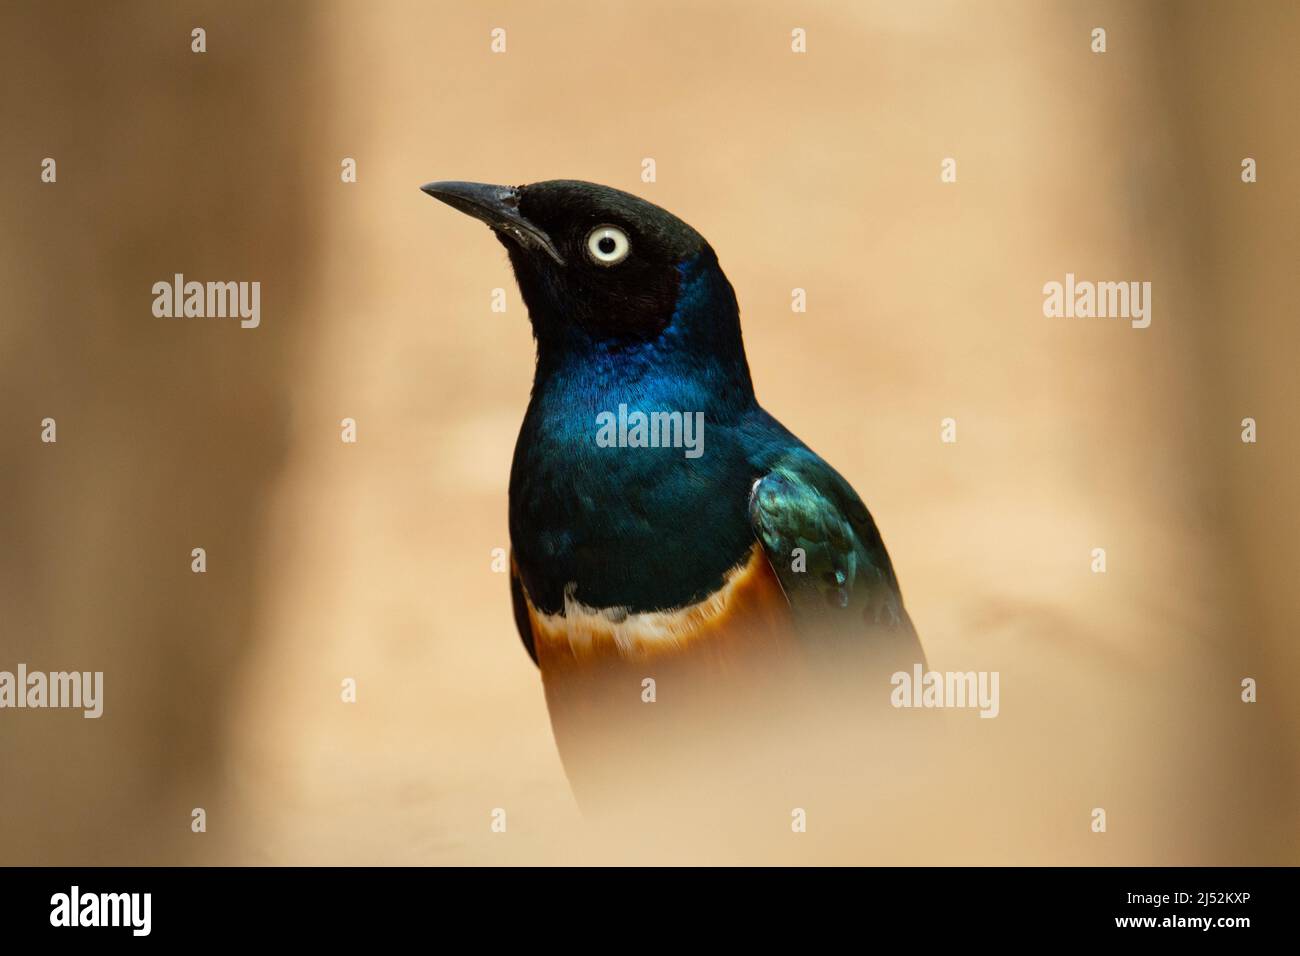 head and shoulders of a chestnut-bellied starling (Lamprotornis pulcher) with a natural desert background Stock Photo